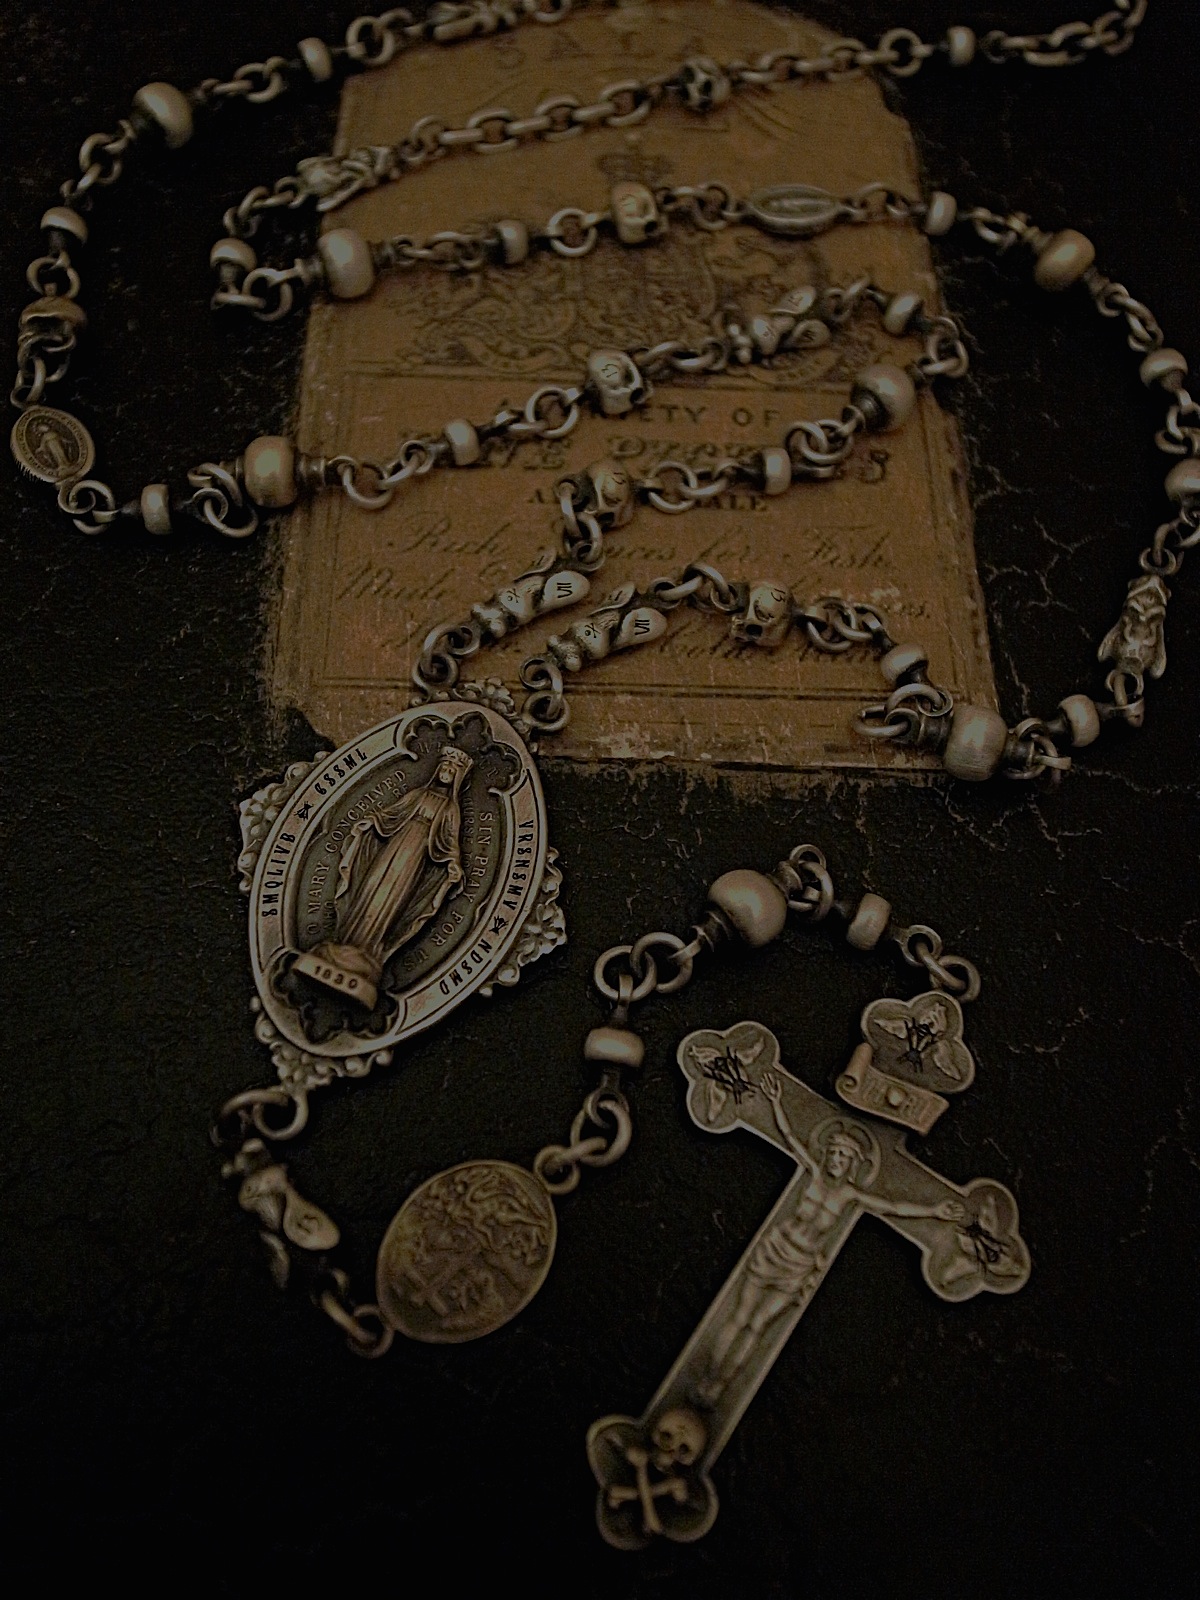 Mement Rosary Necklace